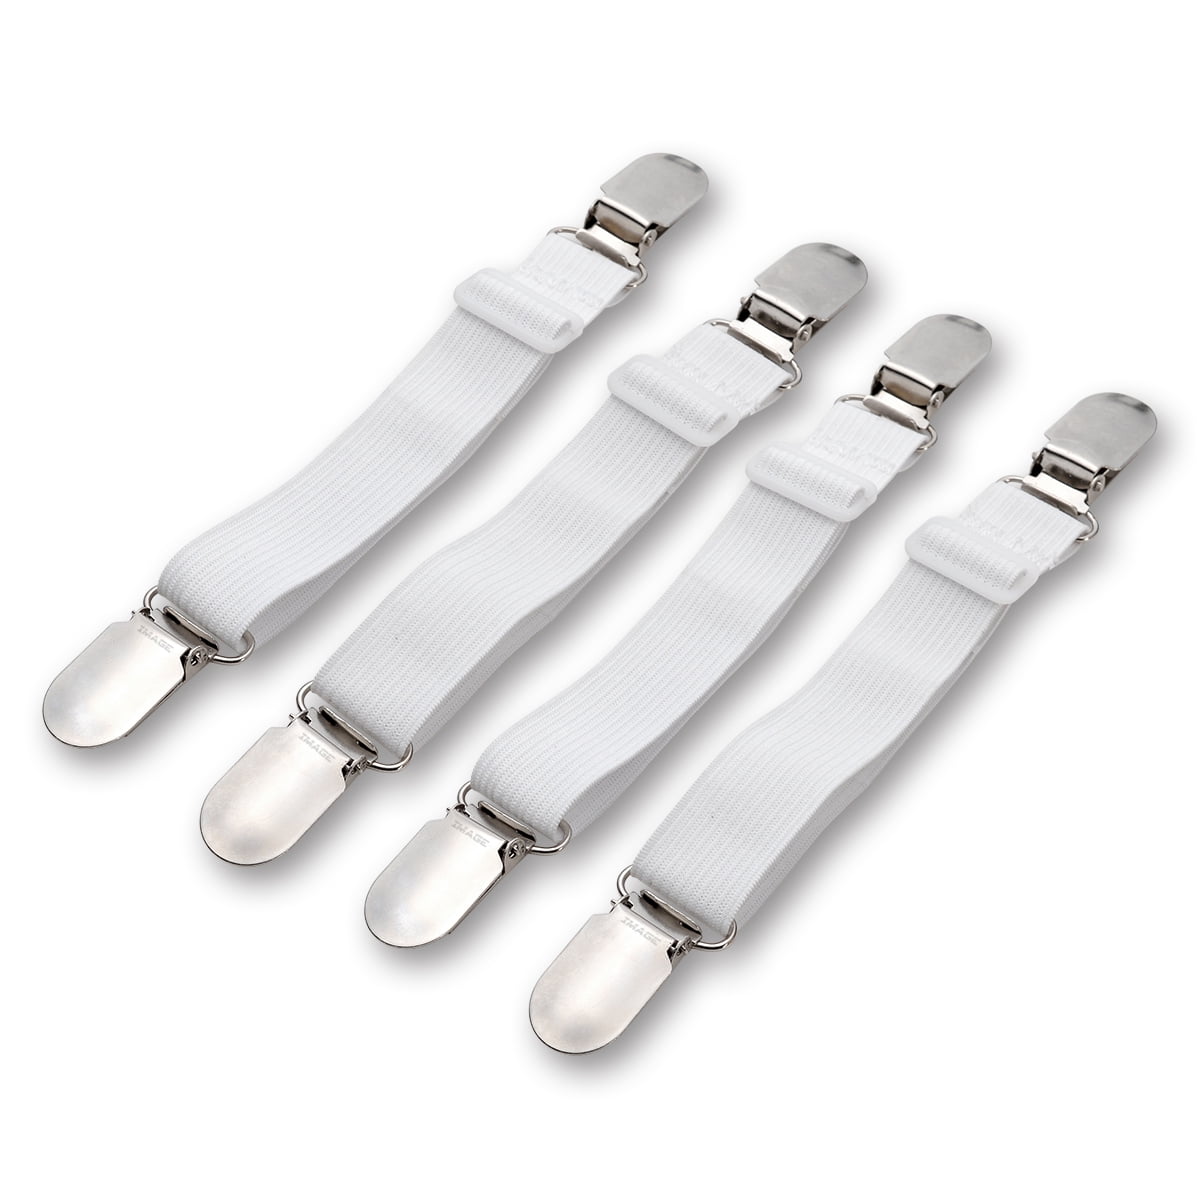 Details about   2x Bed Sheet Mattress Blankets Grippers Elastic Clip Holder Strap Fasteners Set 